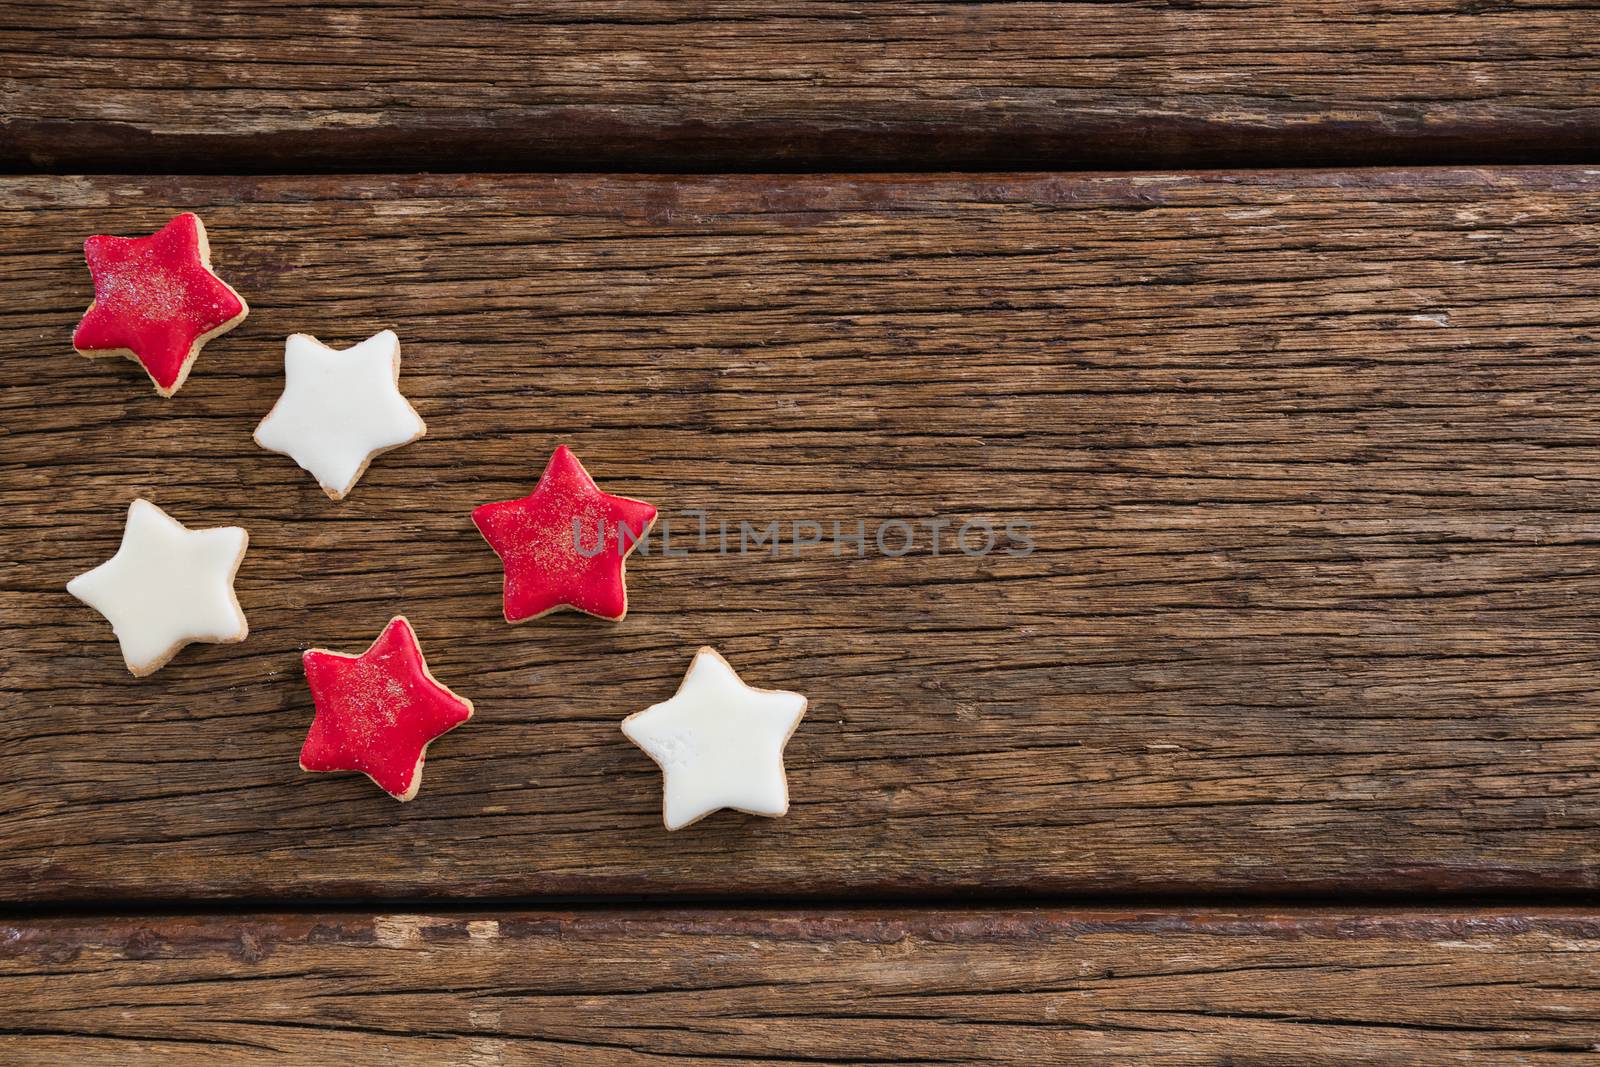 Red and white sugar cookies arranged on wooden table for 4th of July